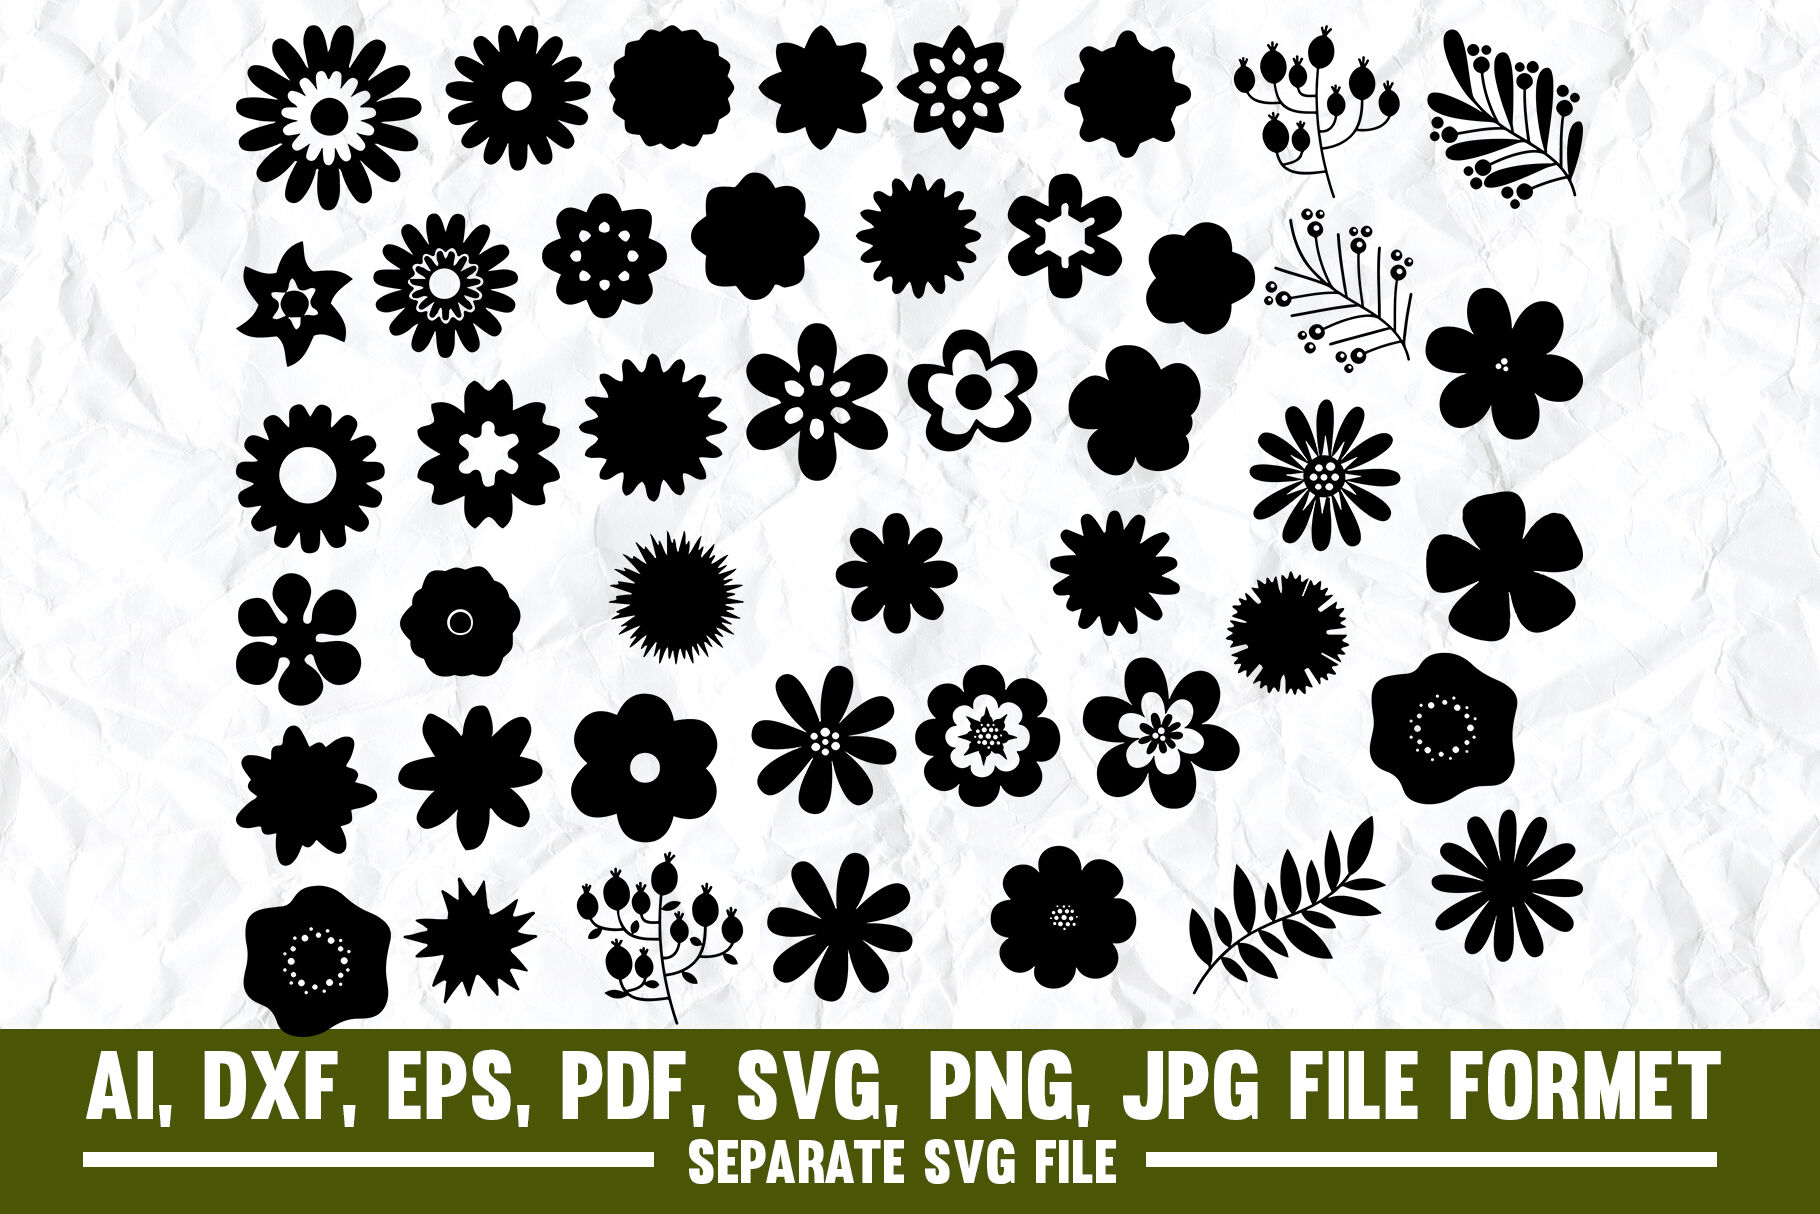 Flower, Springtime, Vector, Icon, Illustration, Cut Out, Daisy, Rose ...